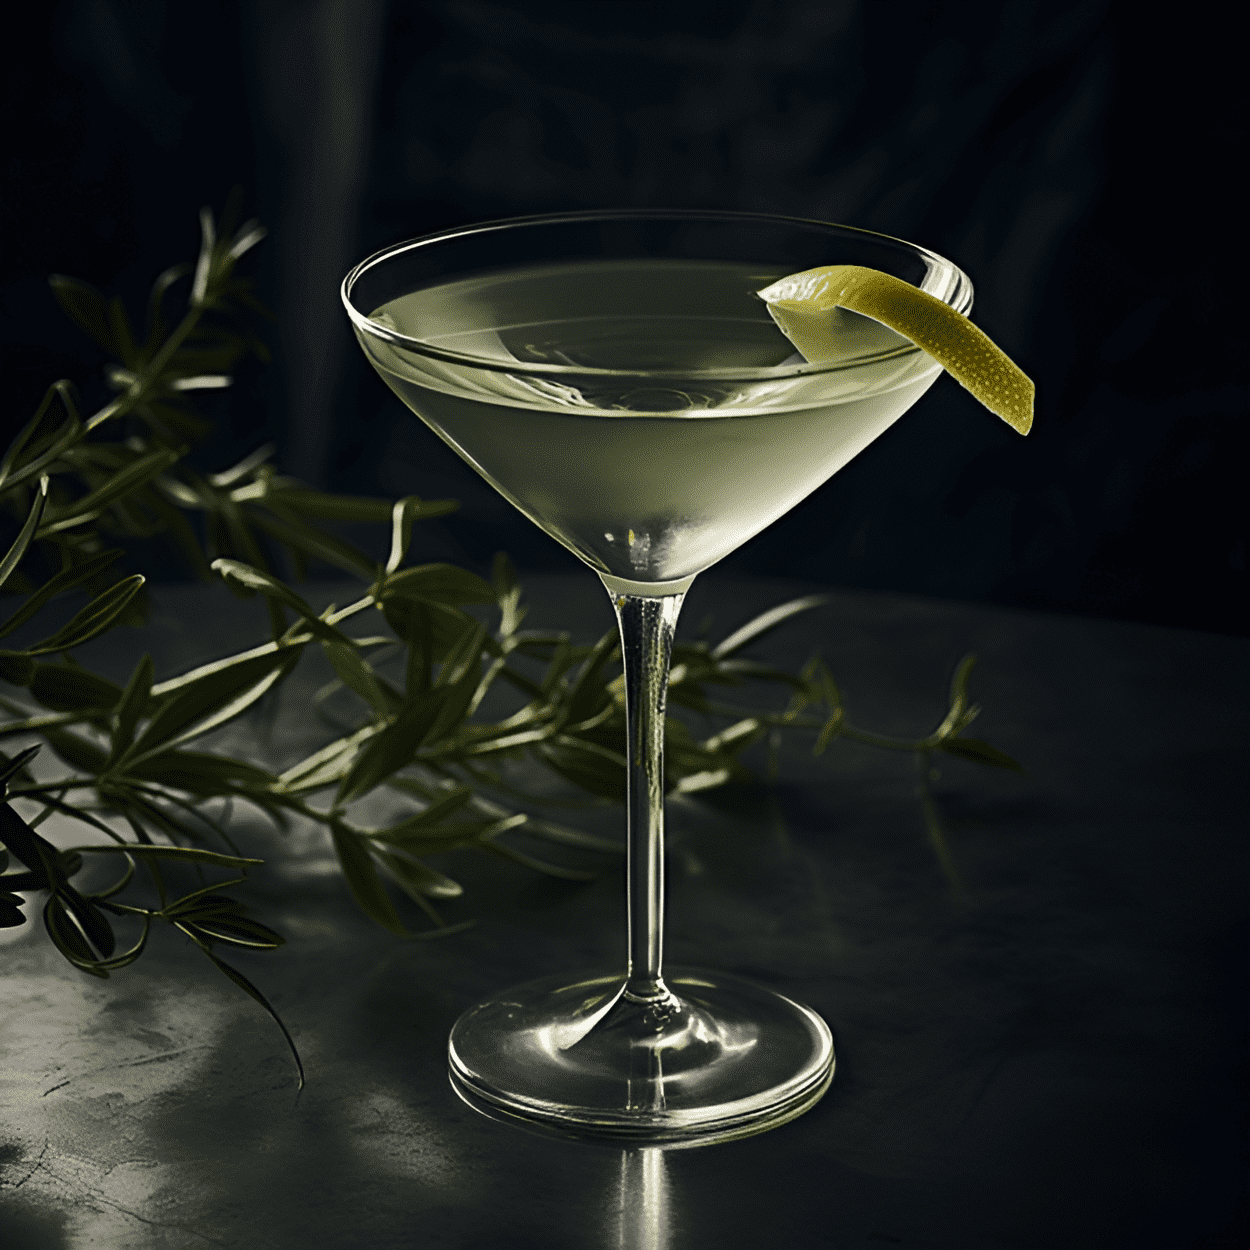 The Vesper Martini has a strong, bold, and slightly bitter taste with a smooth, silky finish. The combination of gin, vodka, and Lillet Blanc creates a complex, well-balanced flavor profile that is both refreshing and invigorating.